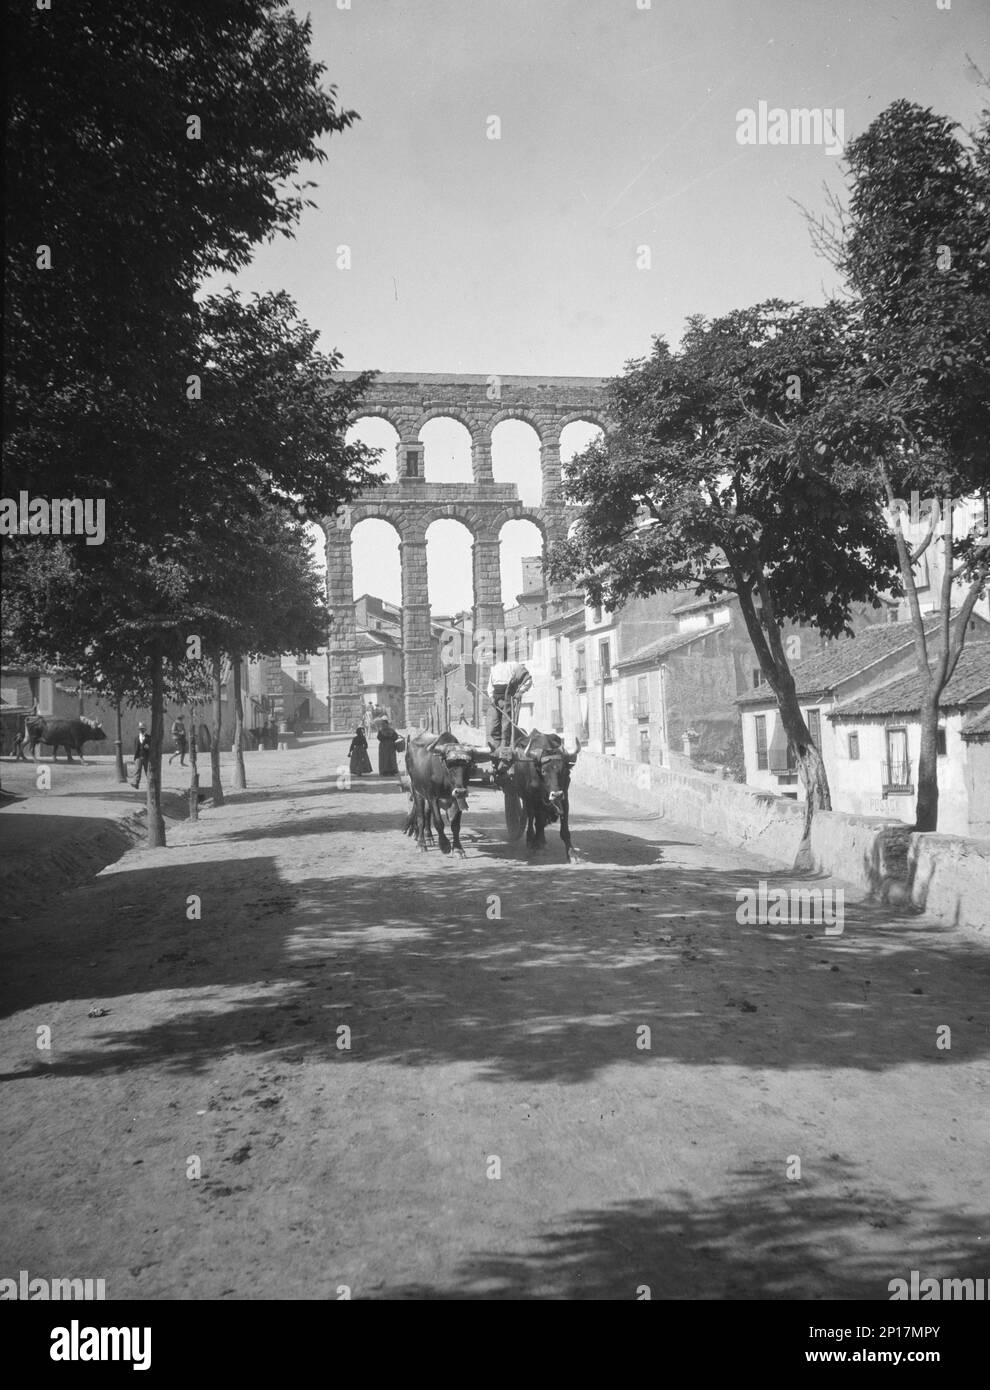 Travel views of Europe, between 1904 and 1938. Roman aqueduct in Segovia, Spain. Stock Photo